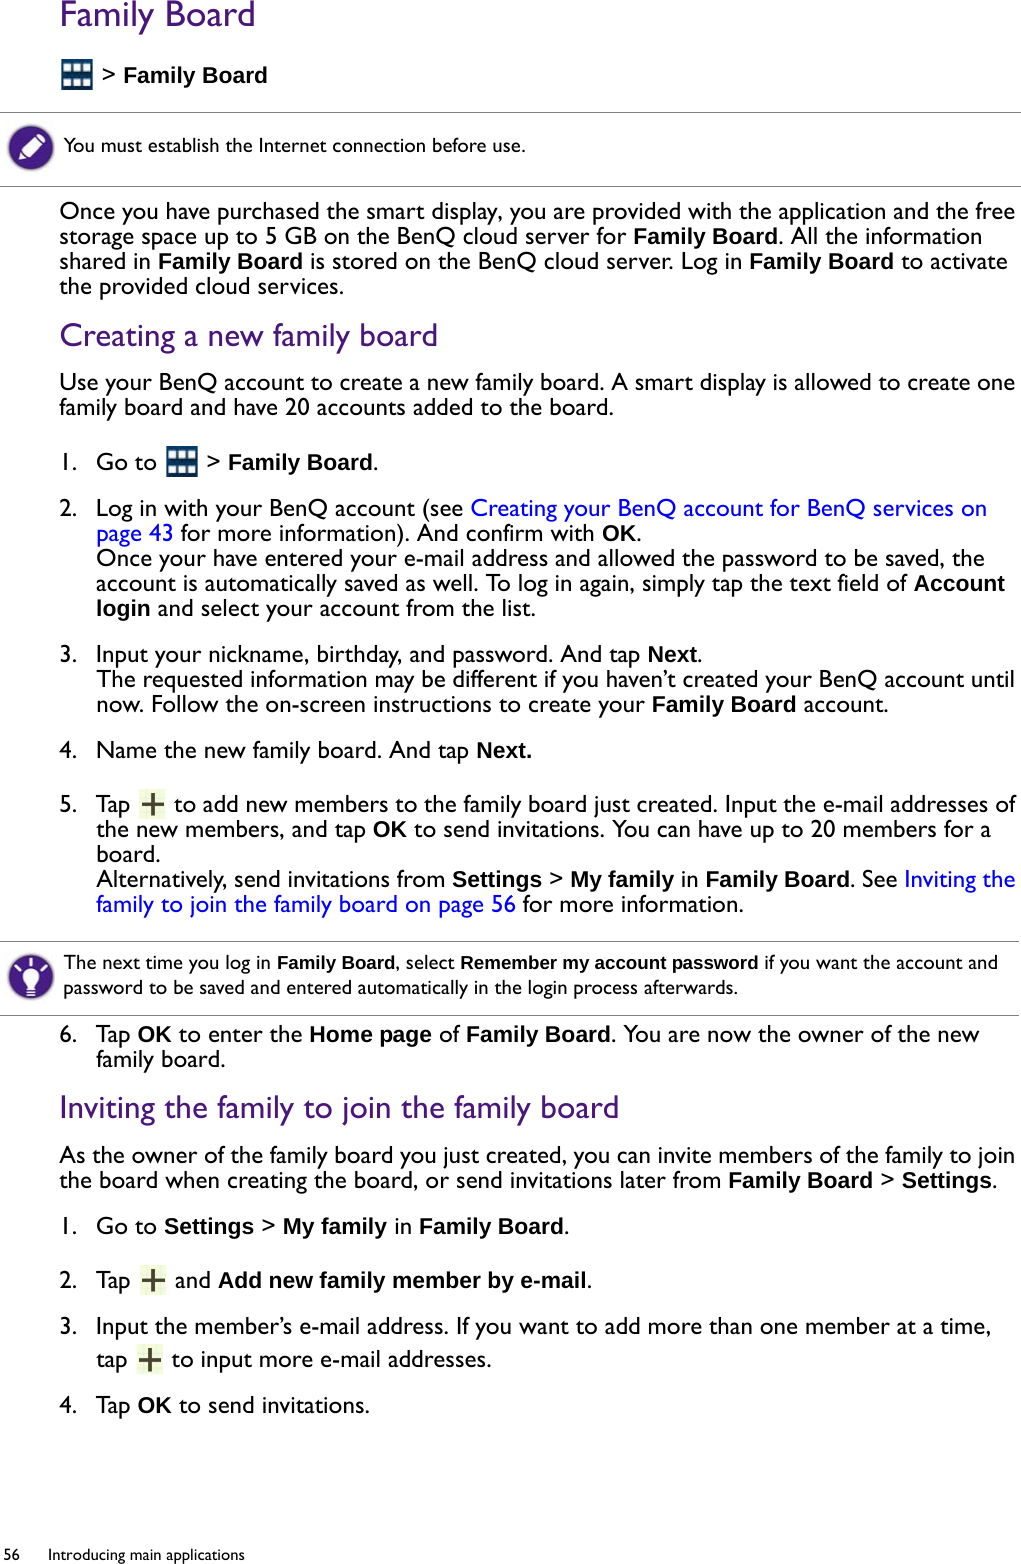 56  Introducing main applications  Family Board &gt; Family BoardOnce you have purchased the smart display, you are provided with the application and the free storage space up to 5 GB on the BenQ cloud server for Family Board. All the information shared in Family Board is stored on the BenQ cloud server. Log in Family Board to activate the provided cloud services.Creating a new family boardUse your BenQ account to create a new family board. A smart display is allowed to create one family board and have 20 accounts added to the board.1.  Go to   &gt; Family Board.2.  Log in with your BenQ account (see Creating your BenQ account for BenQ services on page 43 for more information). And confirm with OK. Once your have entered your e-mail address and allowed the password to be saved, the account is automatically saved as well. To log in again, simply tap the text field of Account login and select your account from the list. 3.  Input your nickname, birthday, and password. And tap Next.The requested information may be different if you haven’t created your BenQ account until now. Follow the on-screen instructions to create your Family Board account.4.  Name the new family board. And tap Next.5.  Tap   to add new members to the family board just created. Input the e-mail addresses of the new members, and tap OK to send invitations. You can have up to 20 members for a board.Alternatively, send invitations from Settings &gt; My family in Family Board. See Inviting the family to join the family board on page 56 for more information.6.  Tap OK to enter the Home page of Family Board. You are now the owner of the new family board.Inviting the family to join the family boardAs the owner of the family board you just created, you can invite members of the family to join the board when creating the board, or send invitations later from Family Board &gt; Settings.1.  Go to Settings &gt; My family in Family Board.2.  Tap   and Add new family member by e-mail.3.  Input the member’s e-mail address. If you want to add more than one member at a time, tap   to input more e-mail addresses.4.  Tap OK to send invitations.You must establish the Internet connection before use.The next time you log in Family Board, select Remember my account password if you want the account and password to be saved and entered automatically in the login process afterwards.